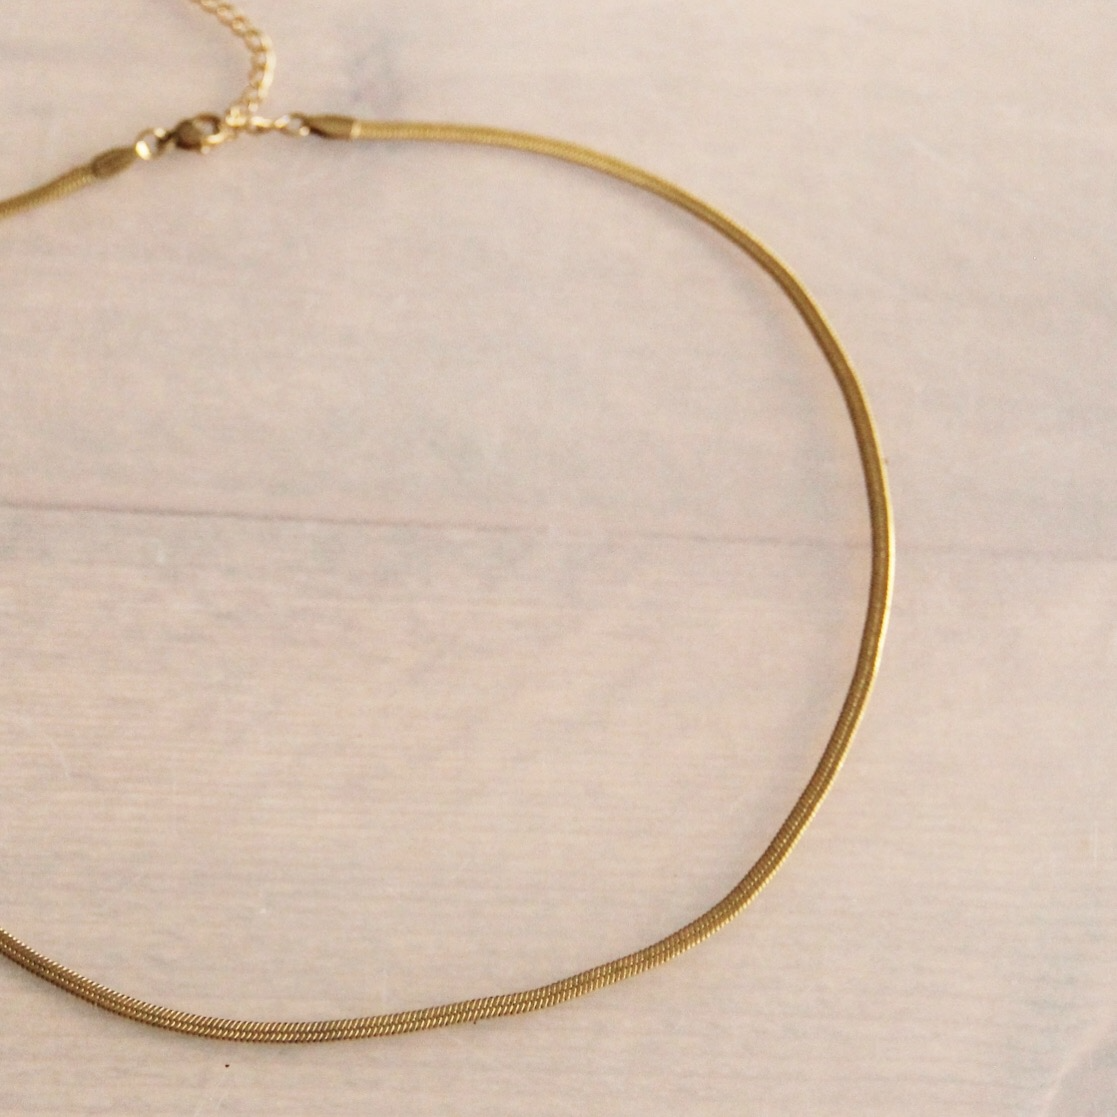 Flat Snake Chain 3mm - Gold Color